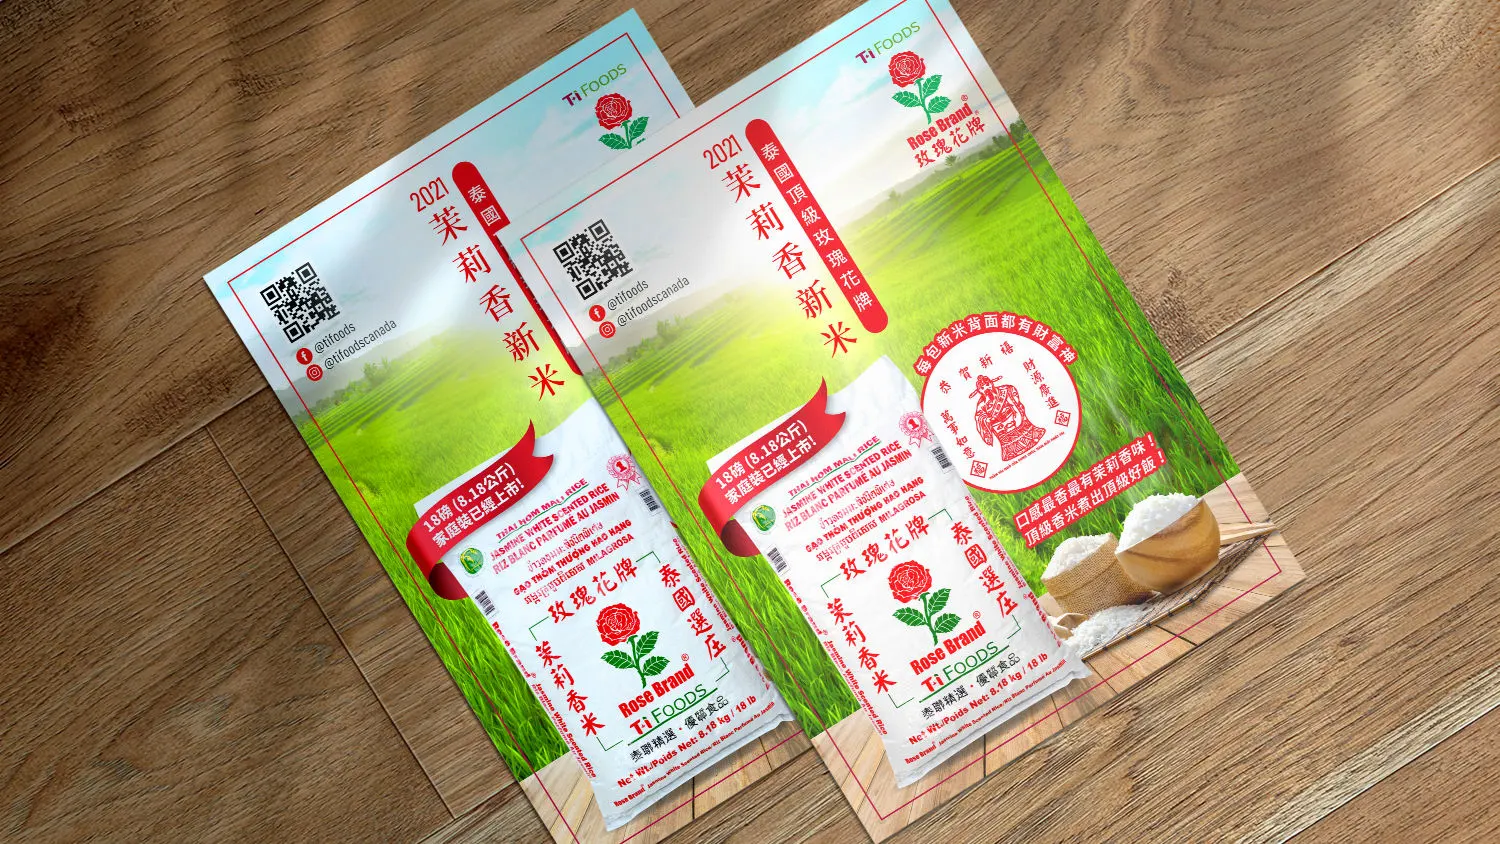 Graphic design project for TI Foods 泰聯貿易. Designed posters